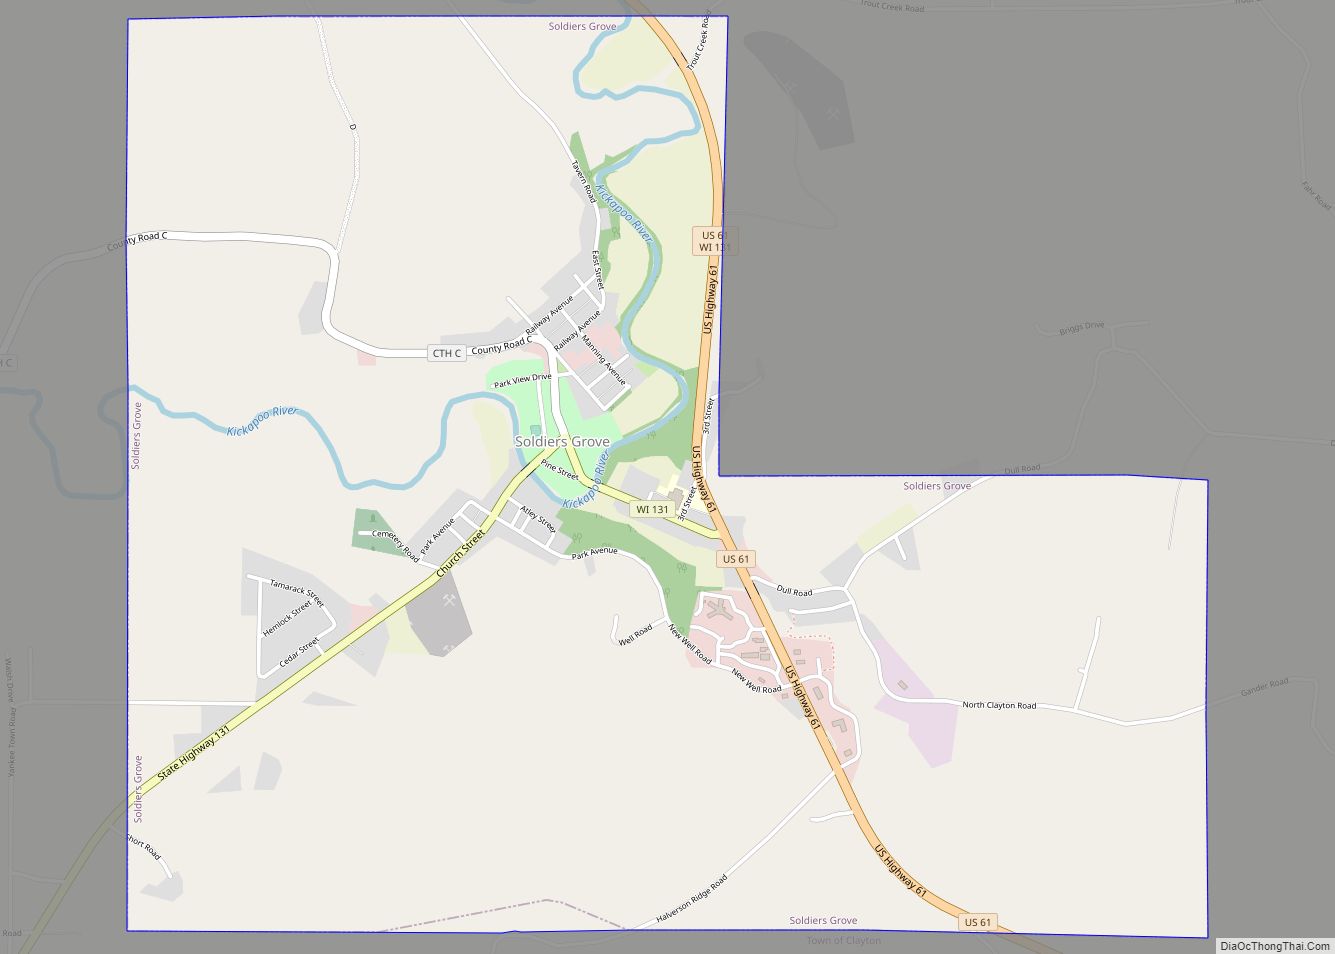 Map of Soldiers Grove village